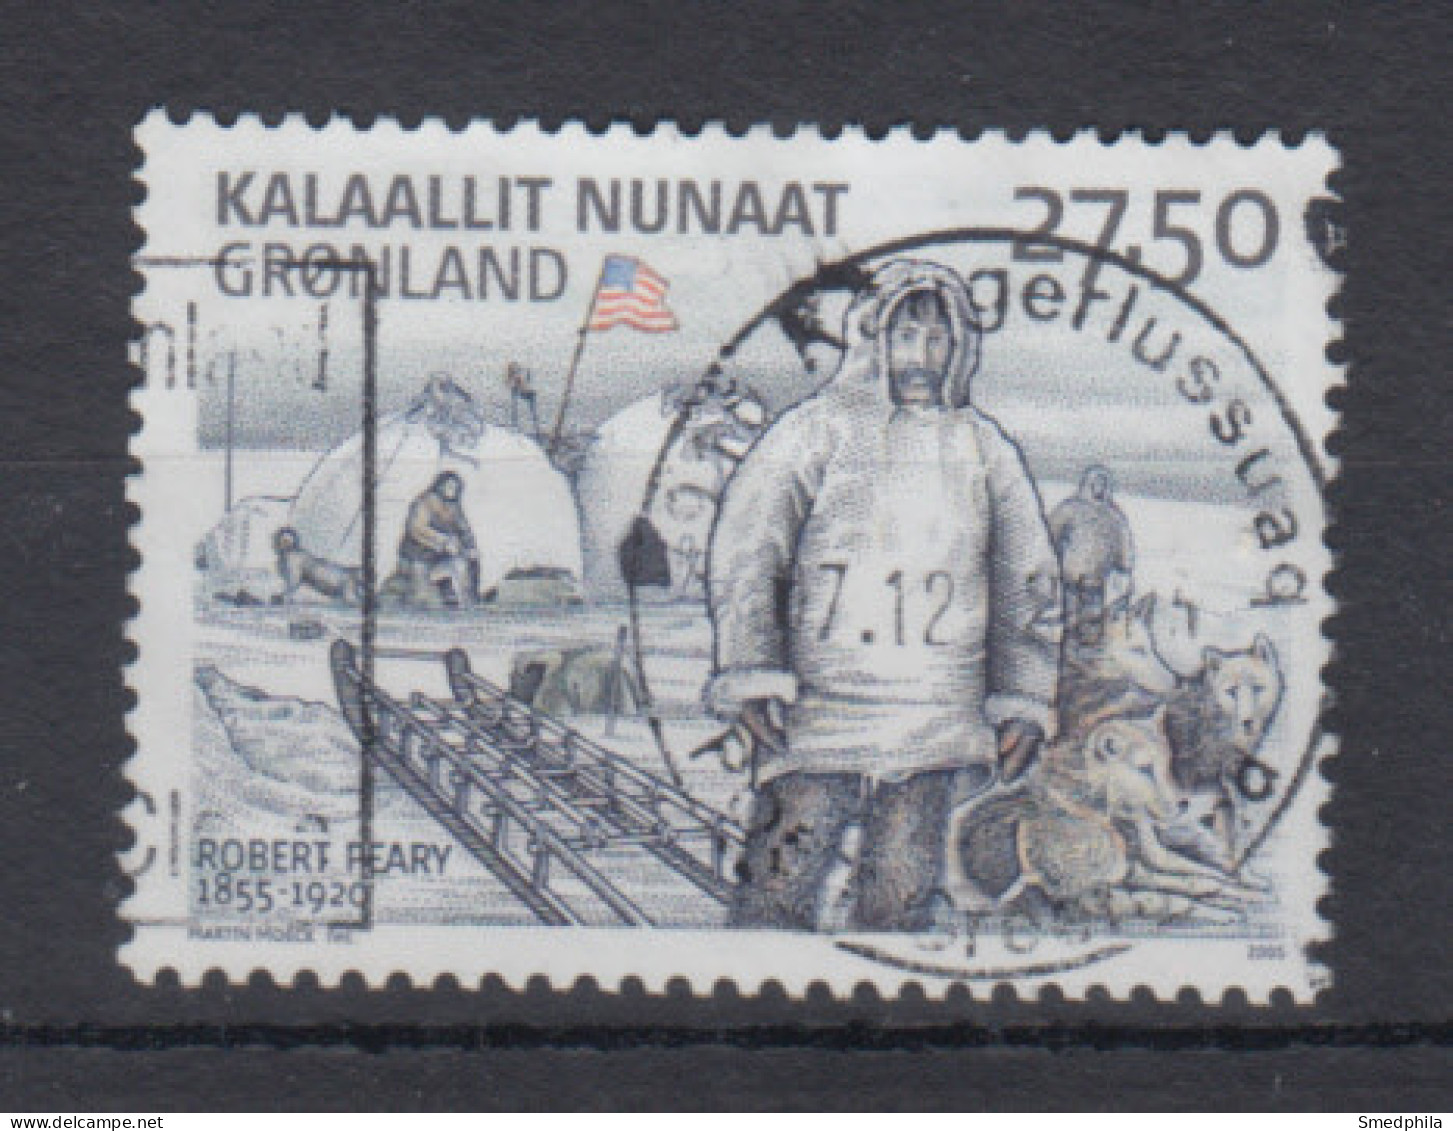 Greenland 2005 - Michel 448 Used - Used Stamps